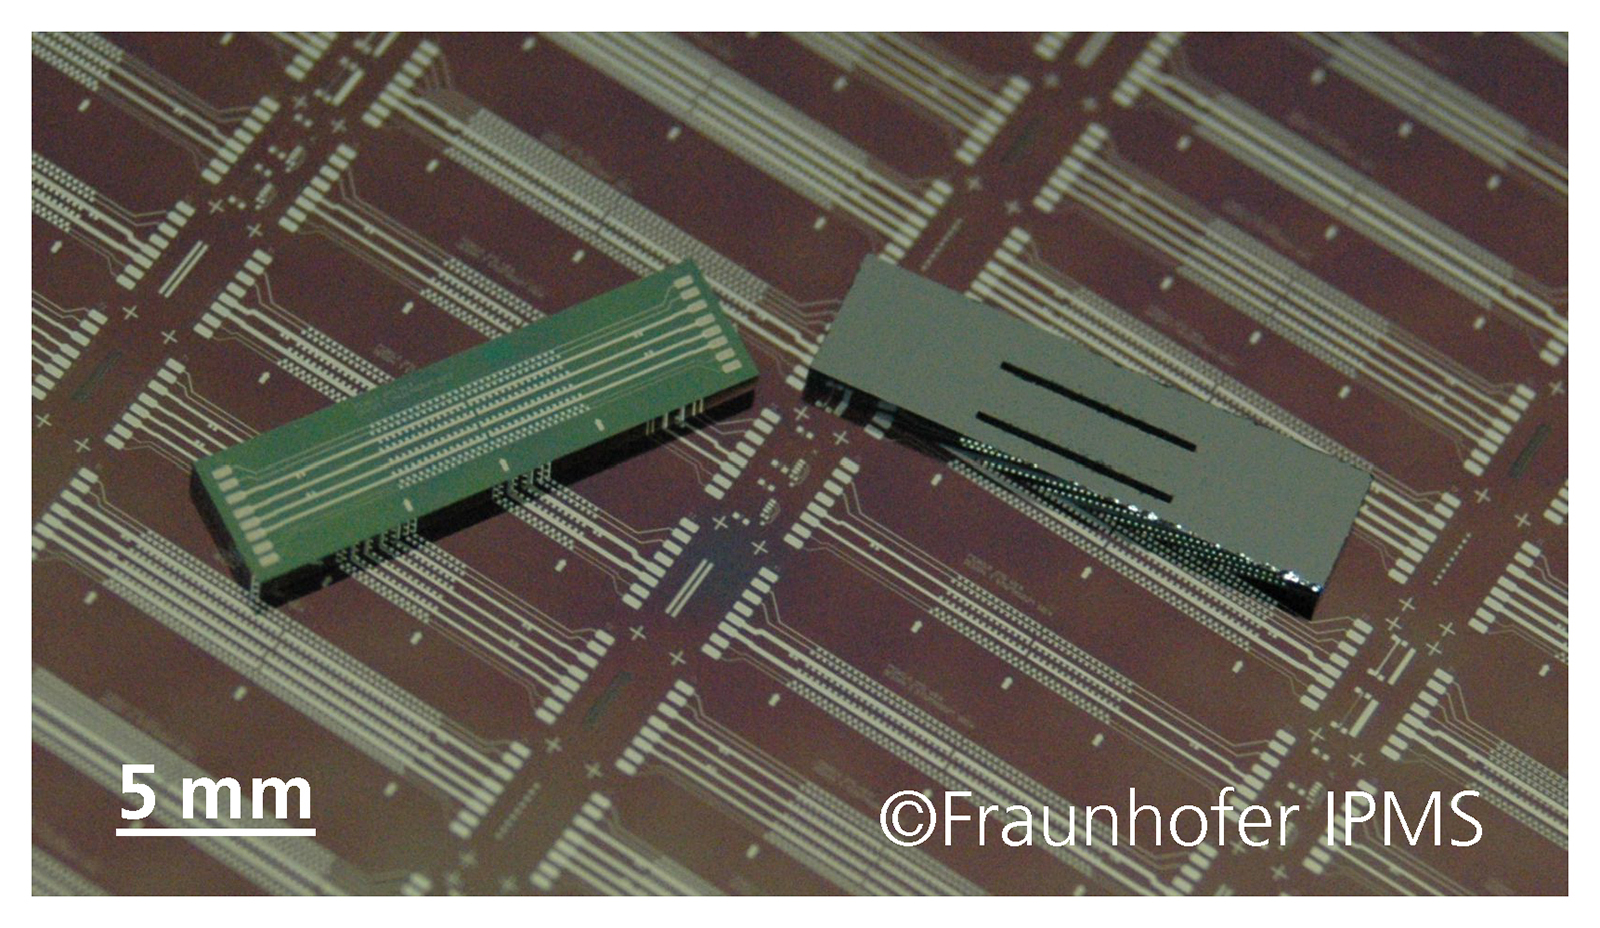 At the heart of this novel ion-mobility spectrometer is a miniaturized FAIMS chip.